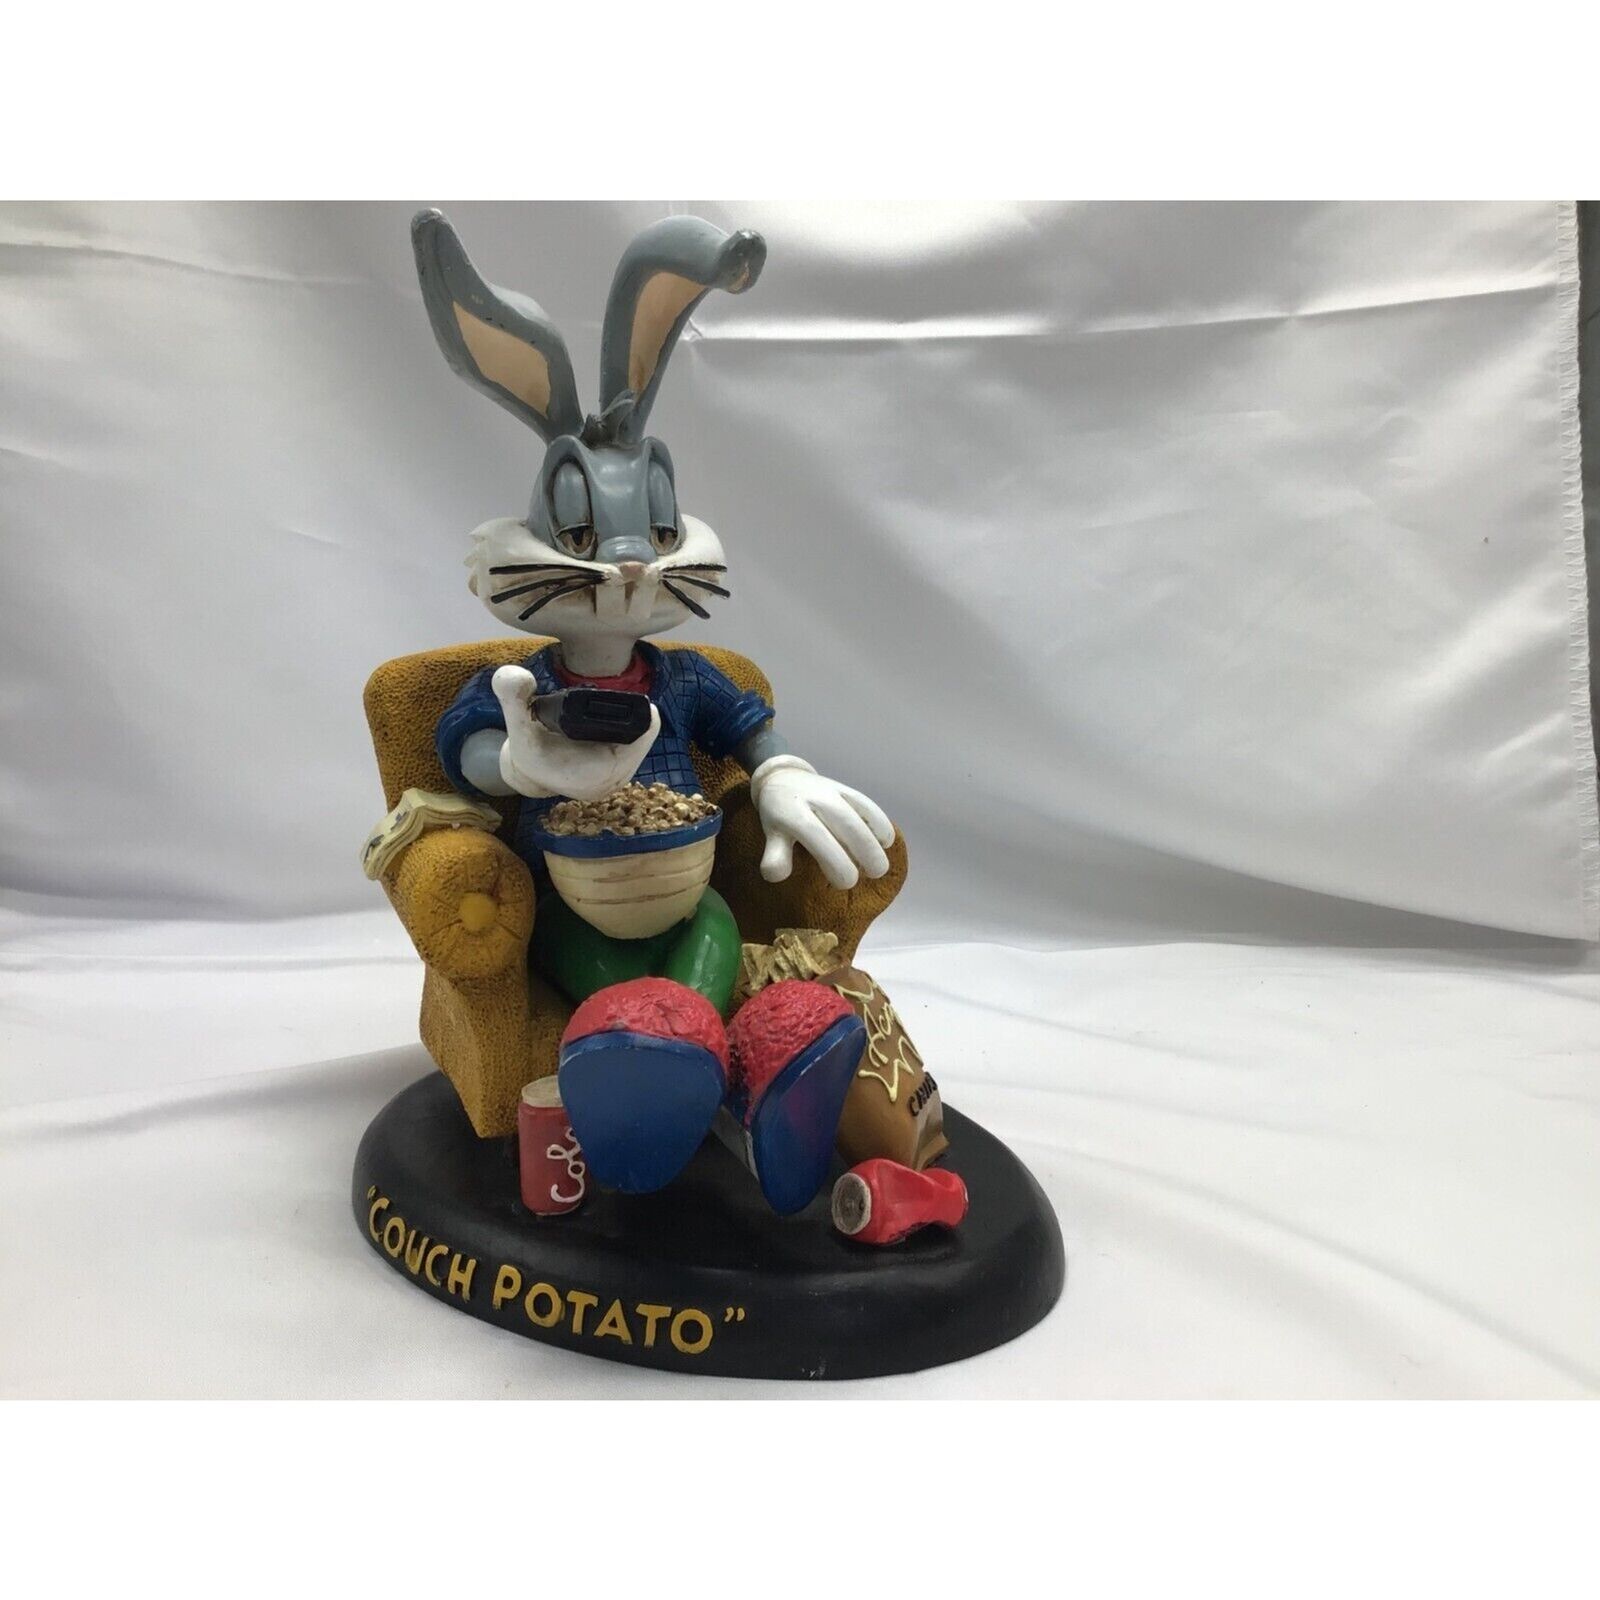 Warner Bros Bugs Bunny Couch Potato Figurine 1994 Collectible Resin